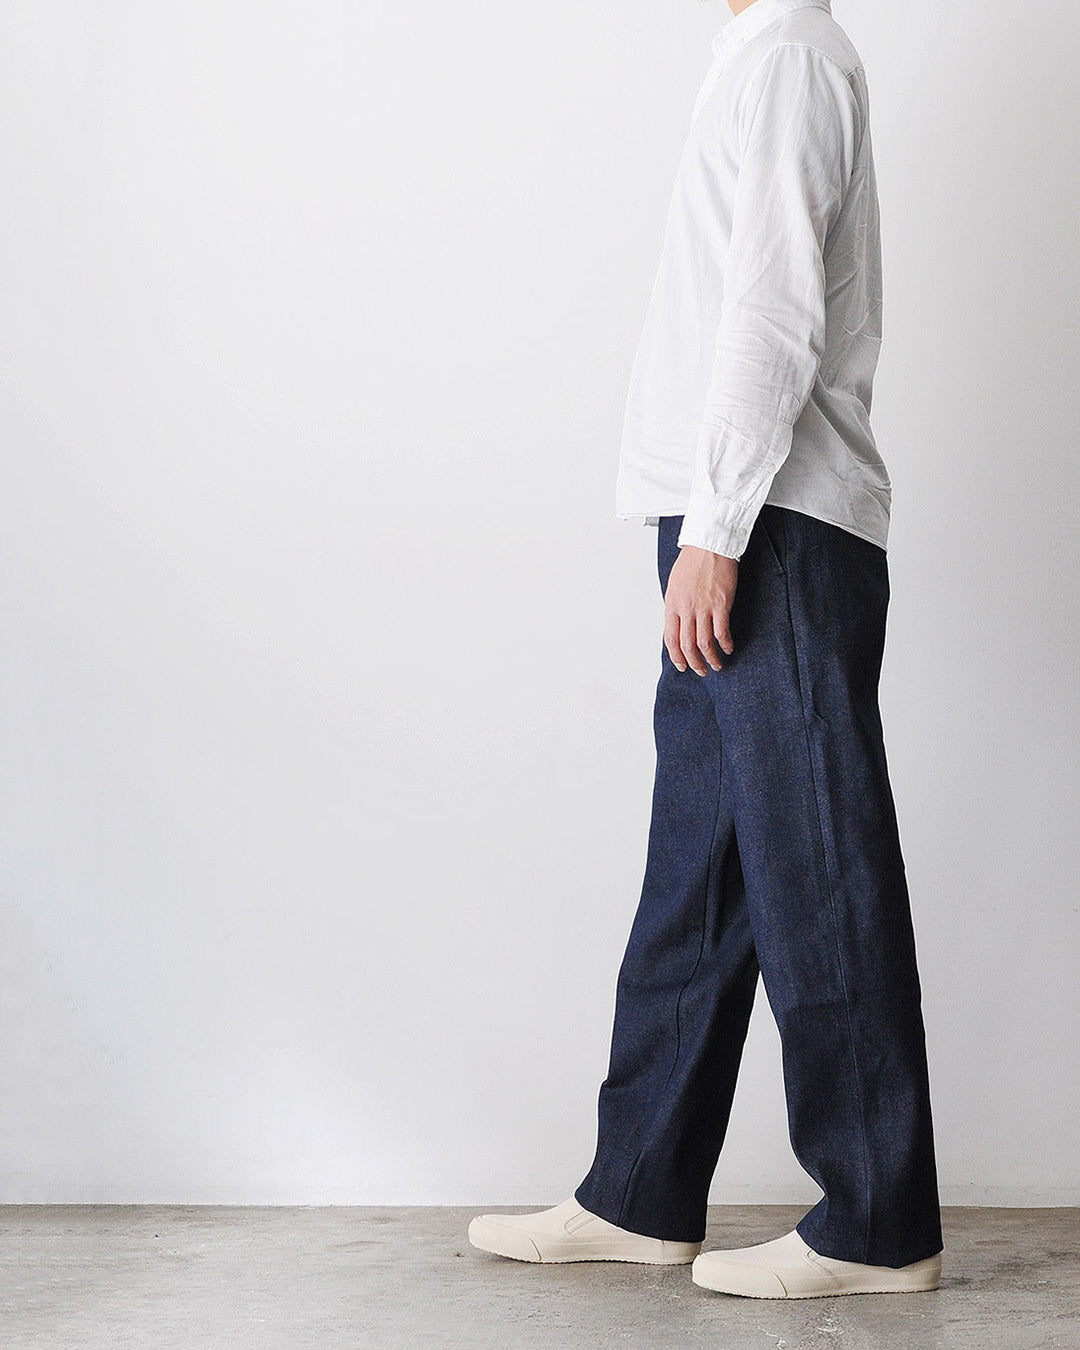 TUKI trousers / black / combed duck / size3